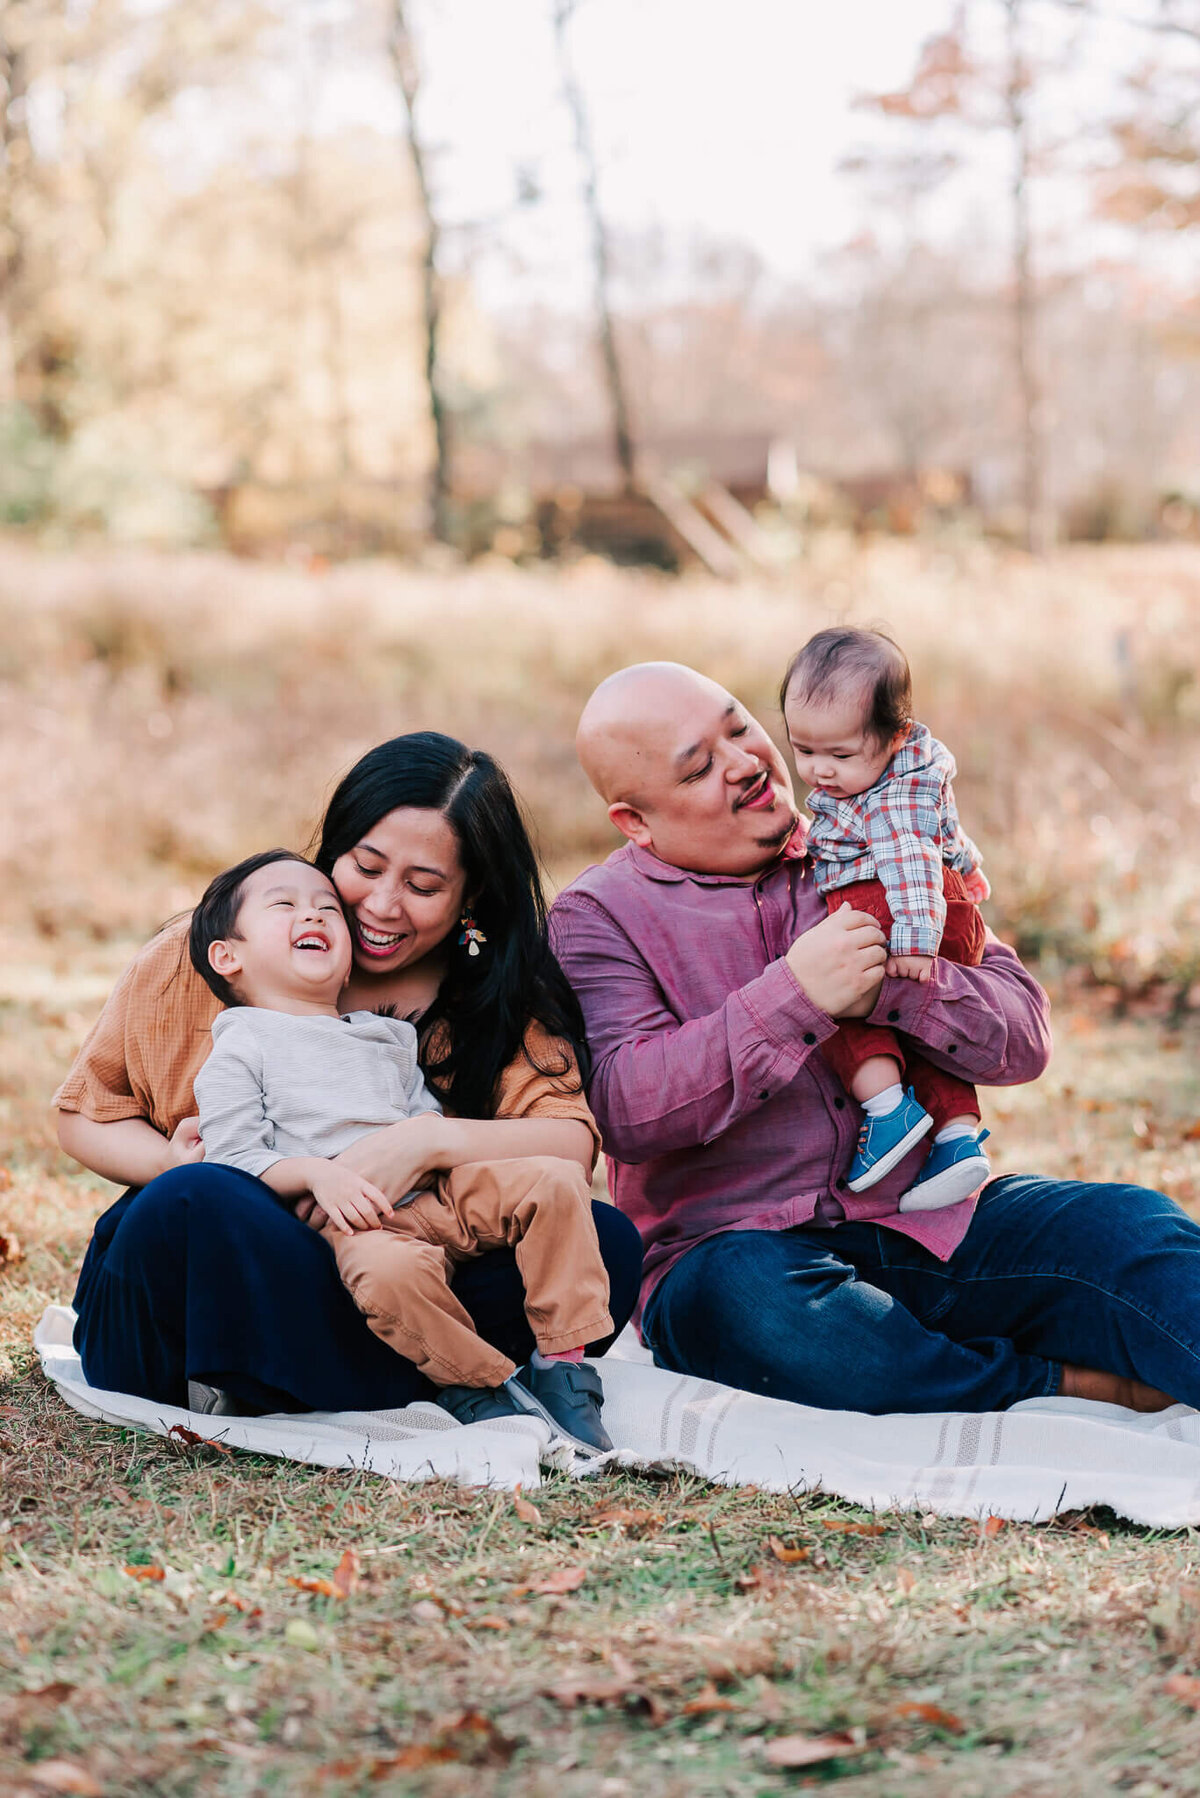 joyful photography of a family of four in Northern Virginia captured by Denise Van